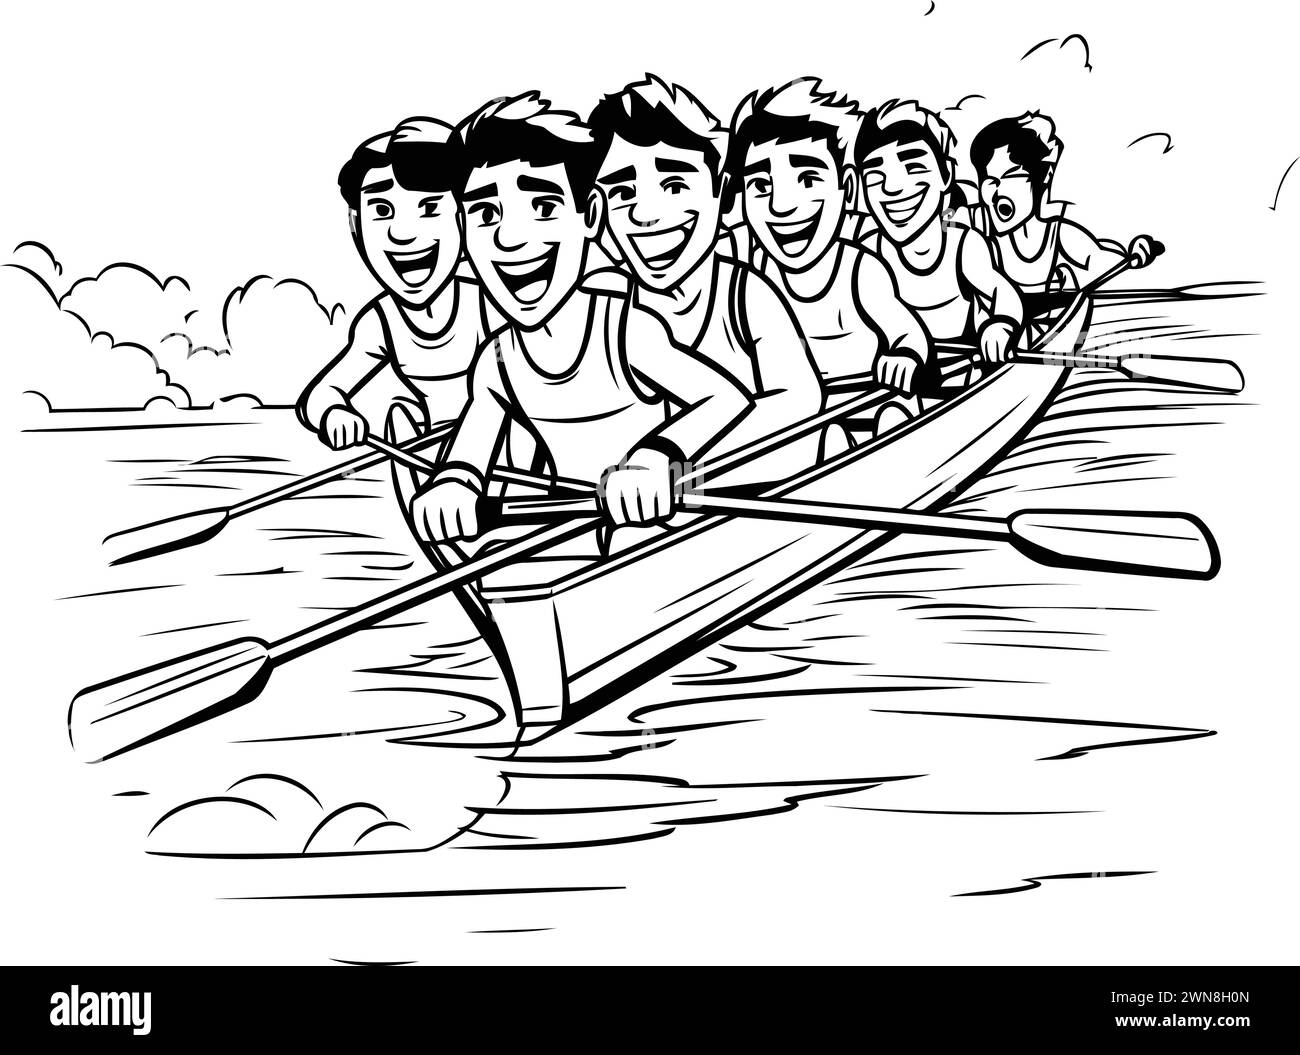 Group of men rowing in a rowboat. Black and white vector illustration ...